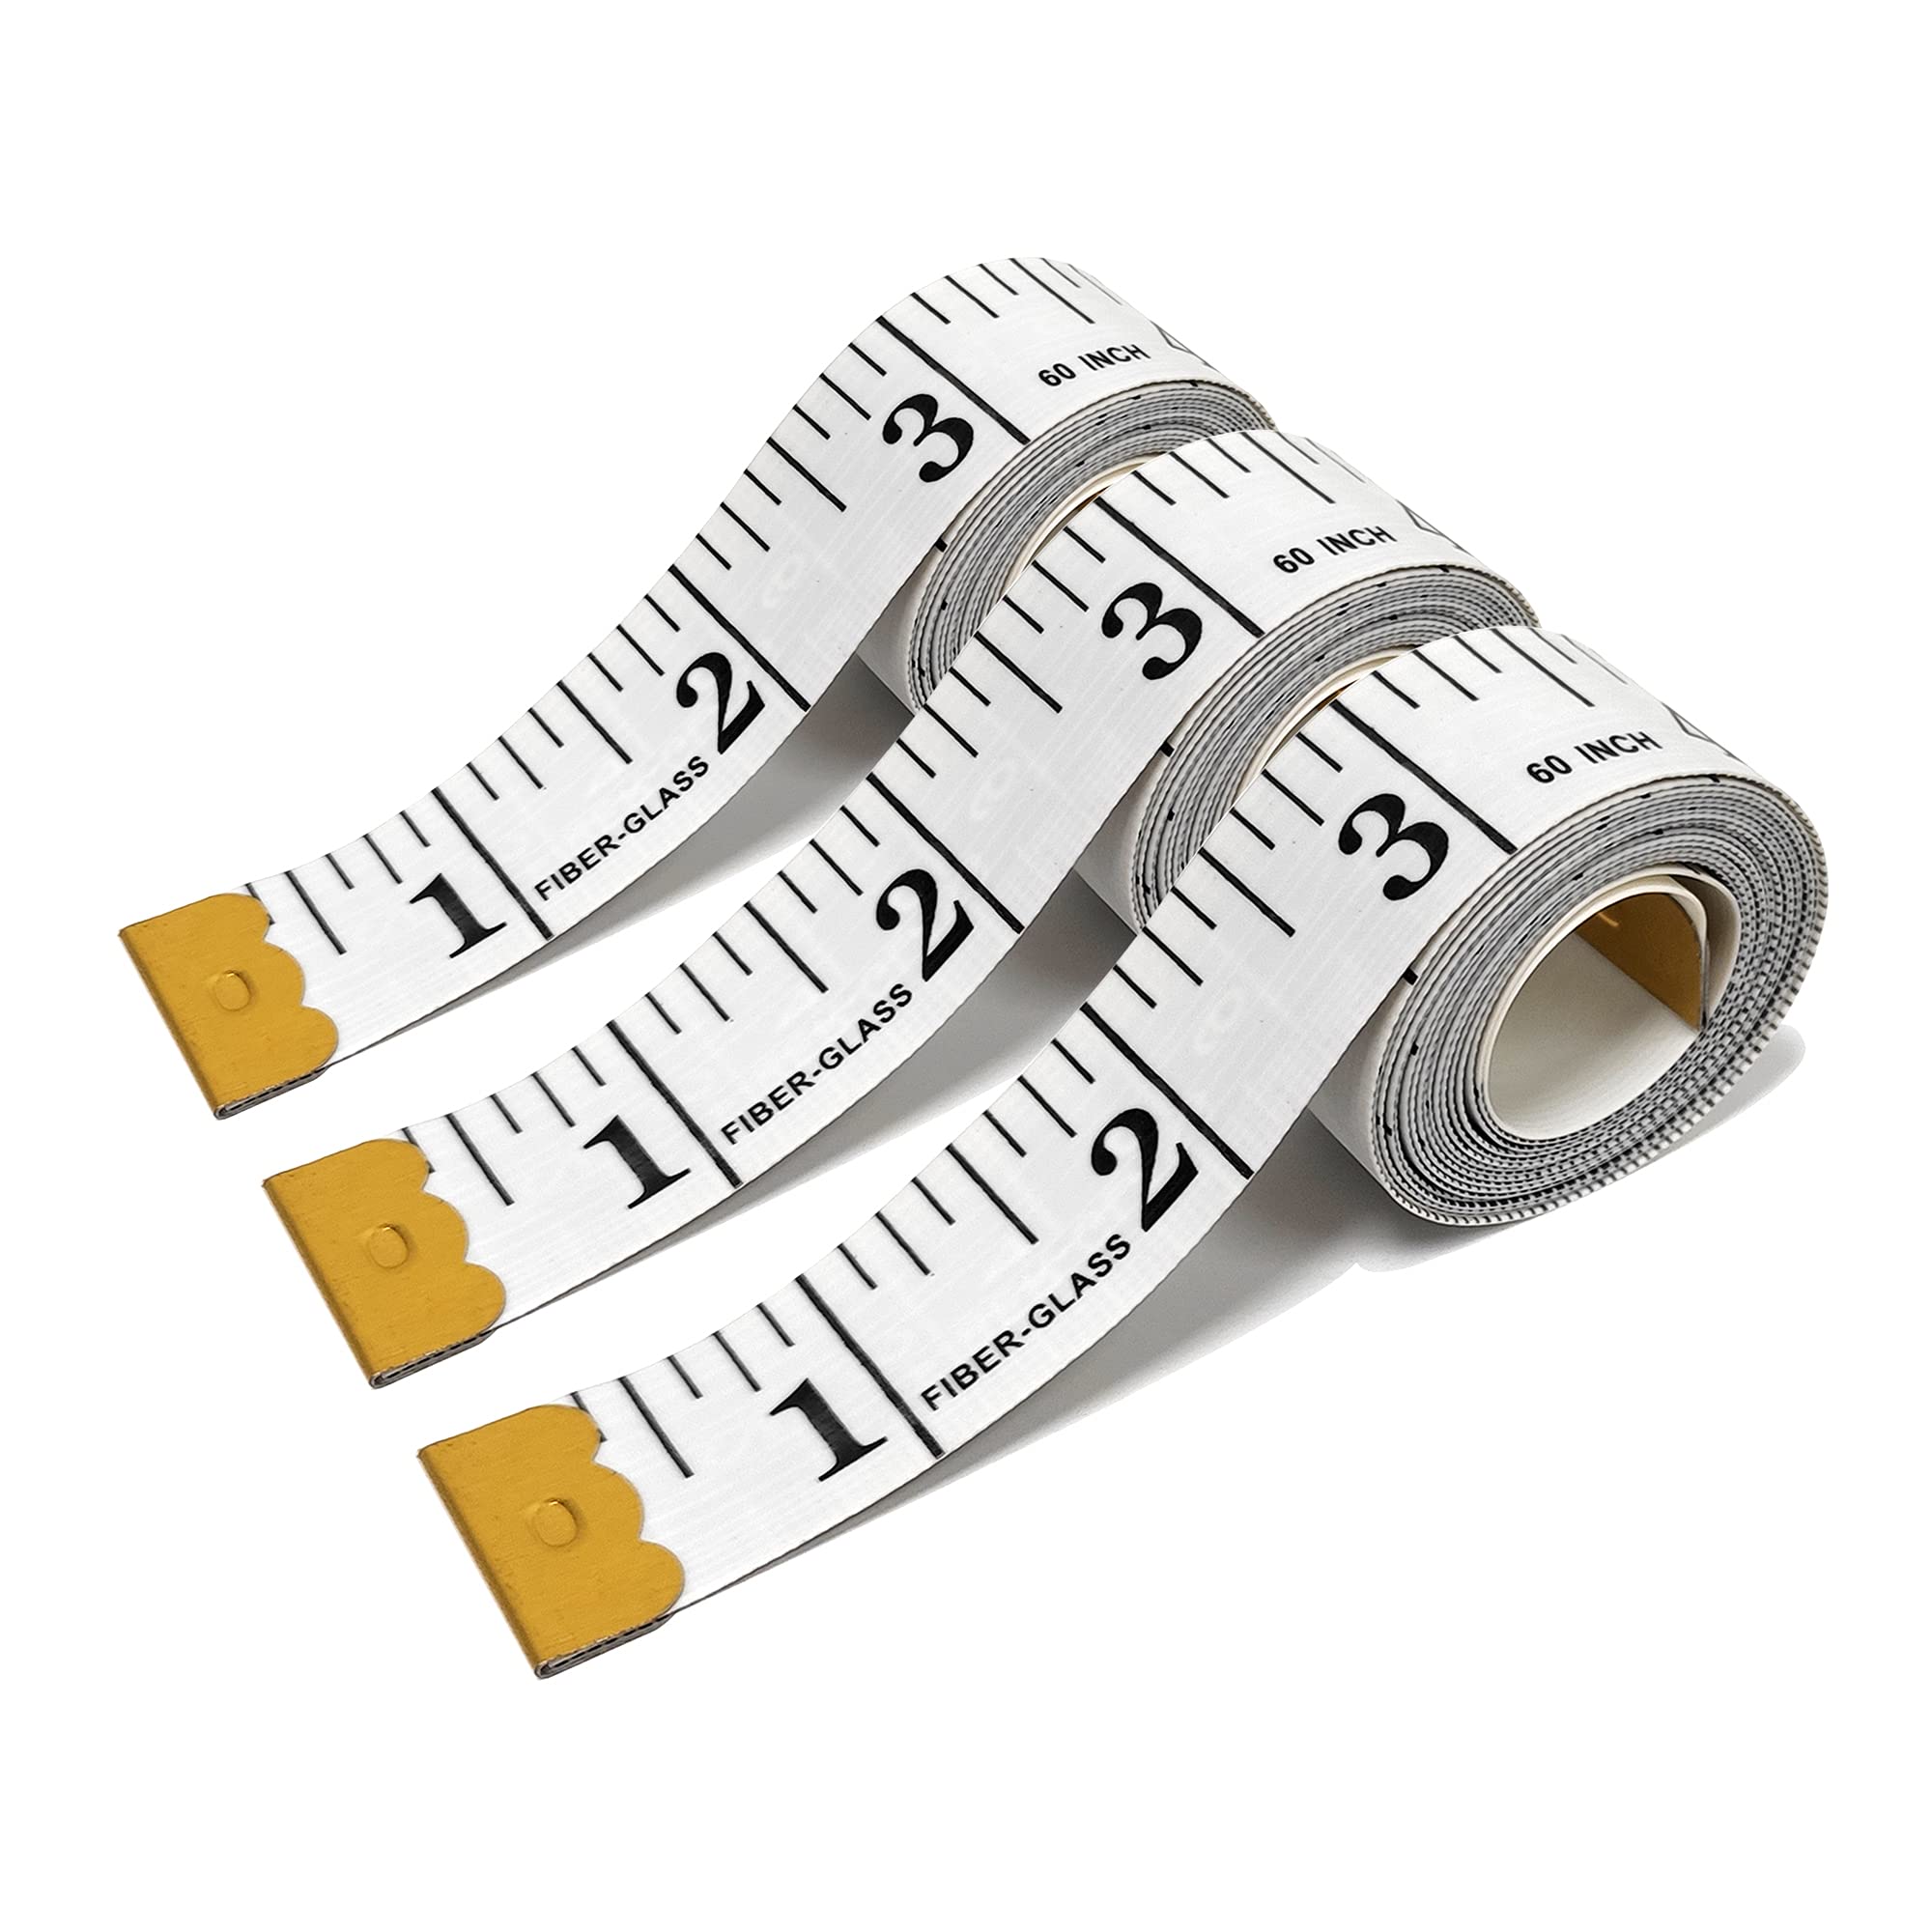 CrafJet White Soft Tape Measure for Body Measurements, Sewing, Tailoring,  Crafting, and Weight Loss - Featuring Versatile & Durable (2 pcs) - 60 INCH